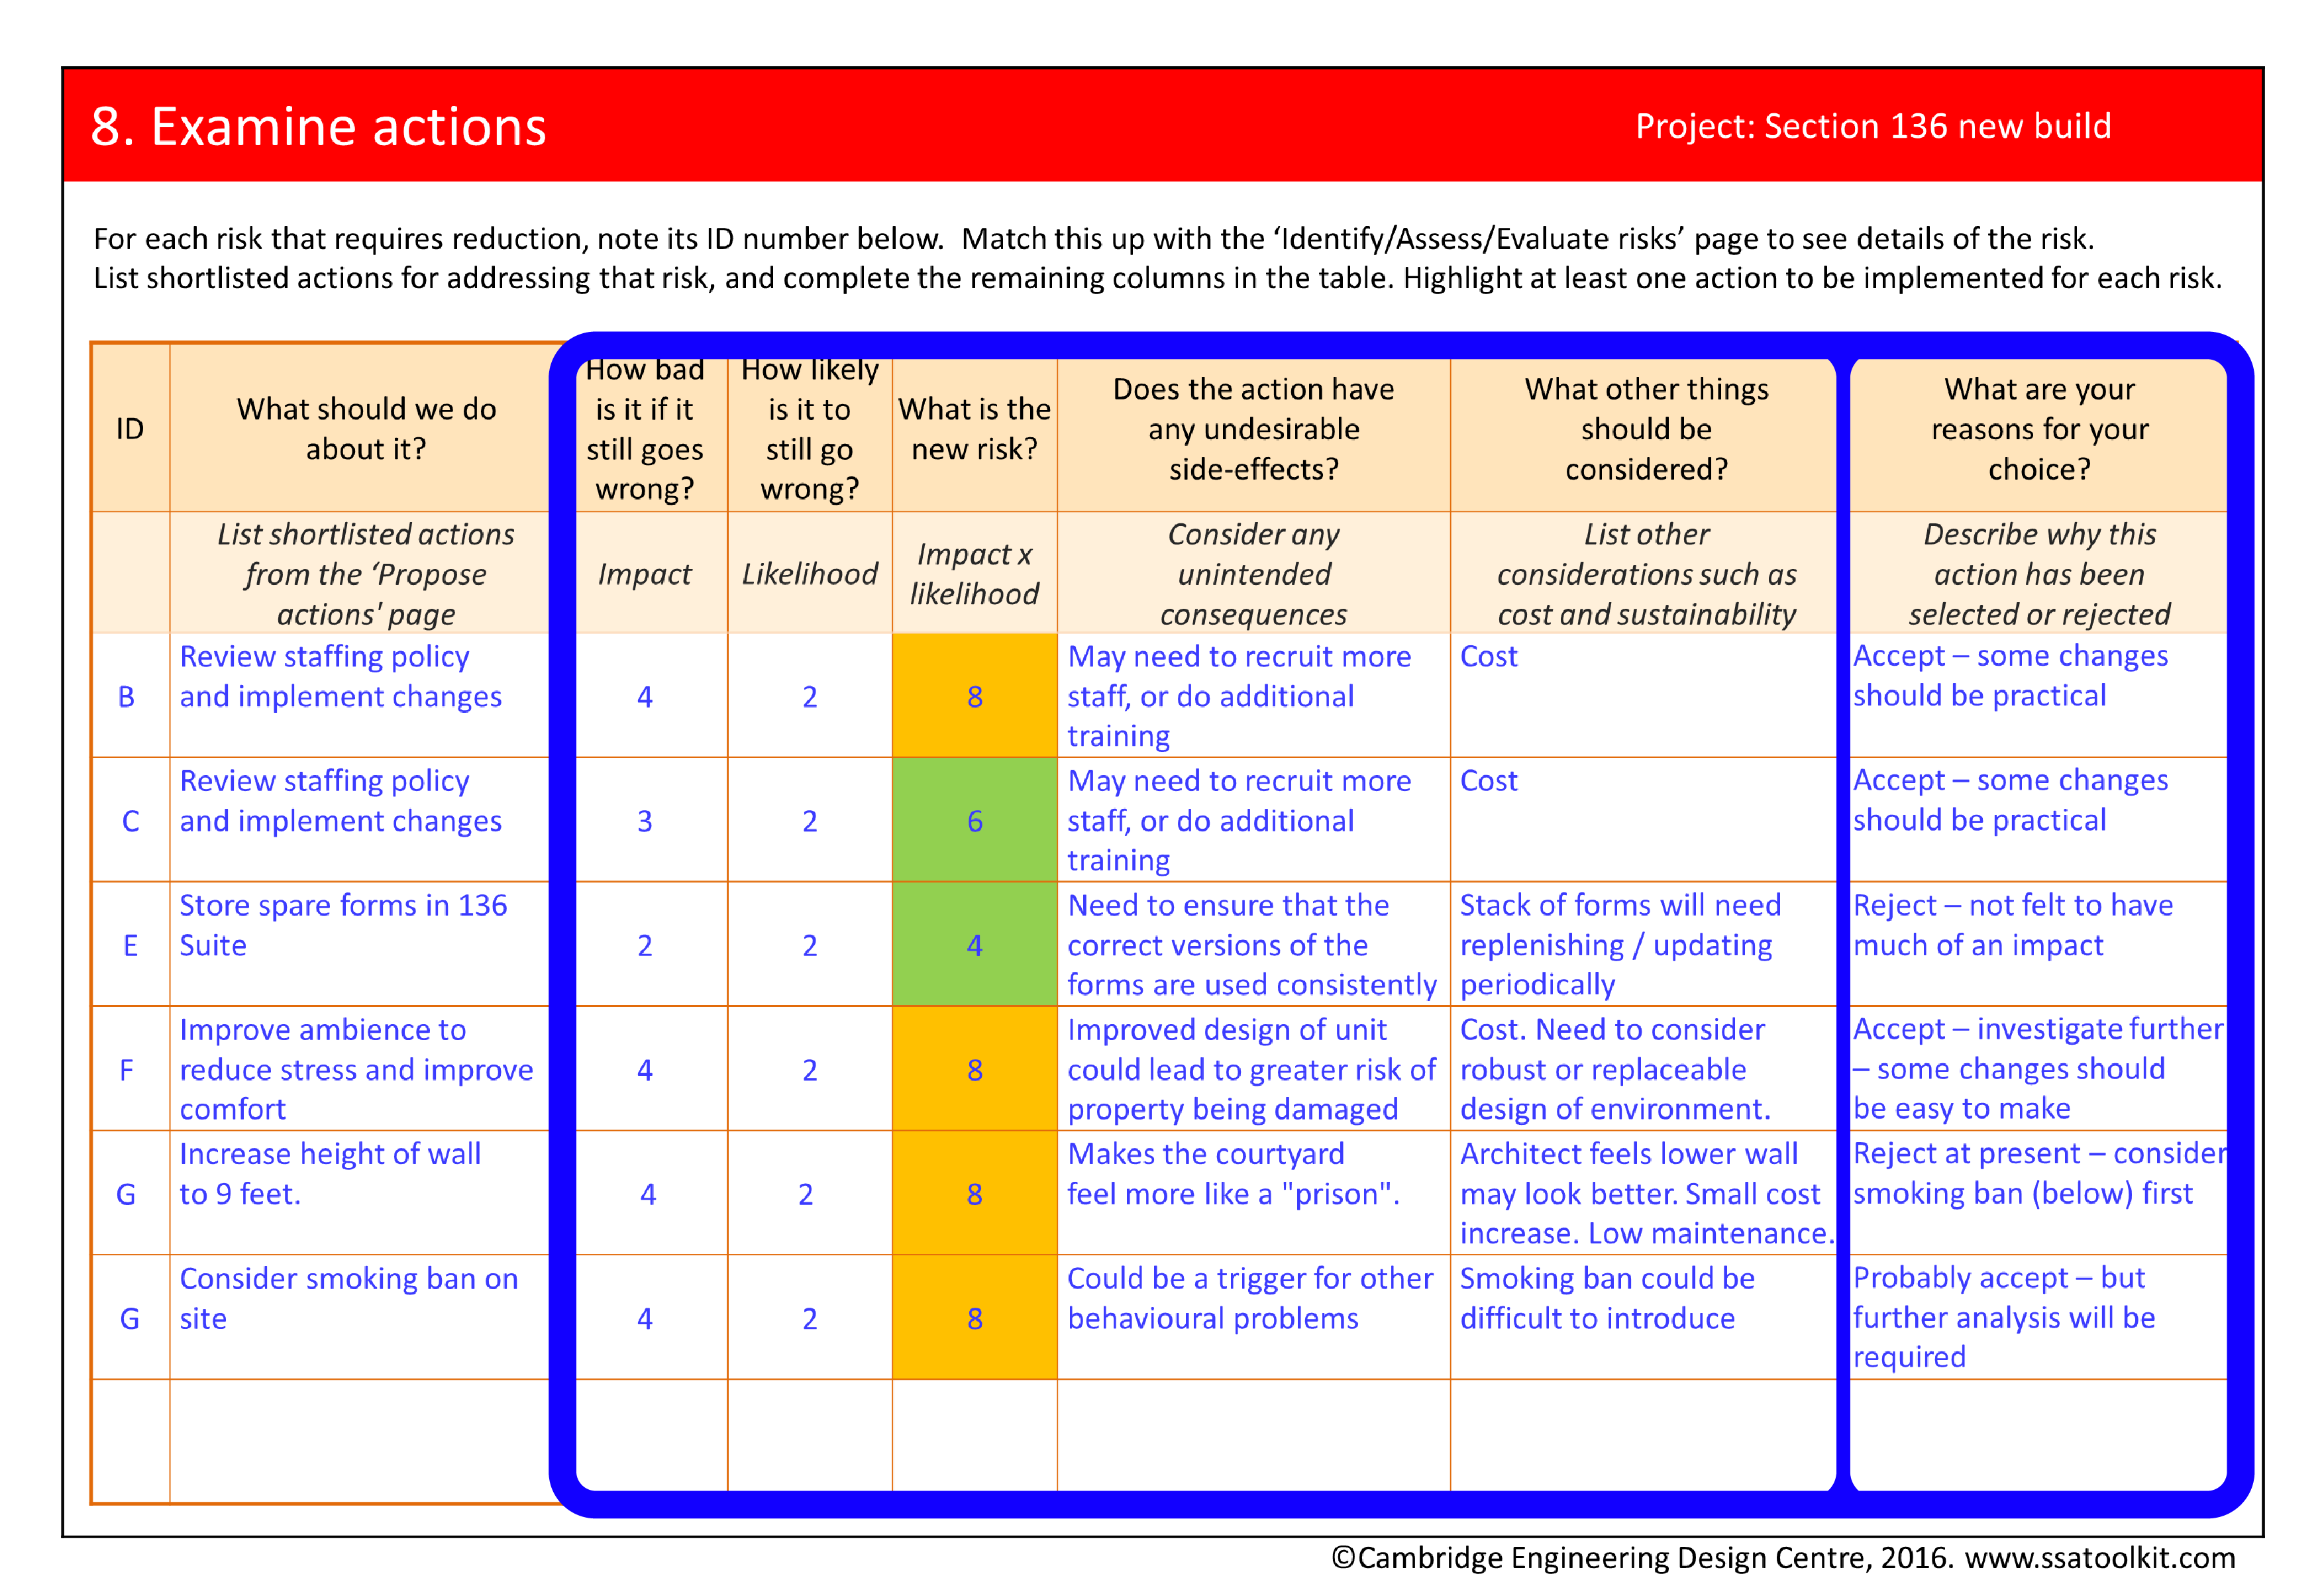 Screenshot of the Examine actions page from the Section 136 case study. The actions that have been chosen for implementation or to examine further are highlighted. These include: Review staffing policy and implement changes, Improve ambience of suite to reduce stress and improve comfort, and Consider a smoking ban on site. The full form in pdf is available from the Resources page.